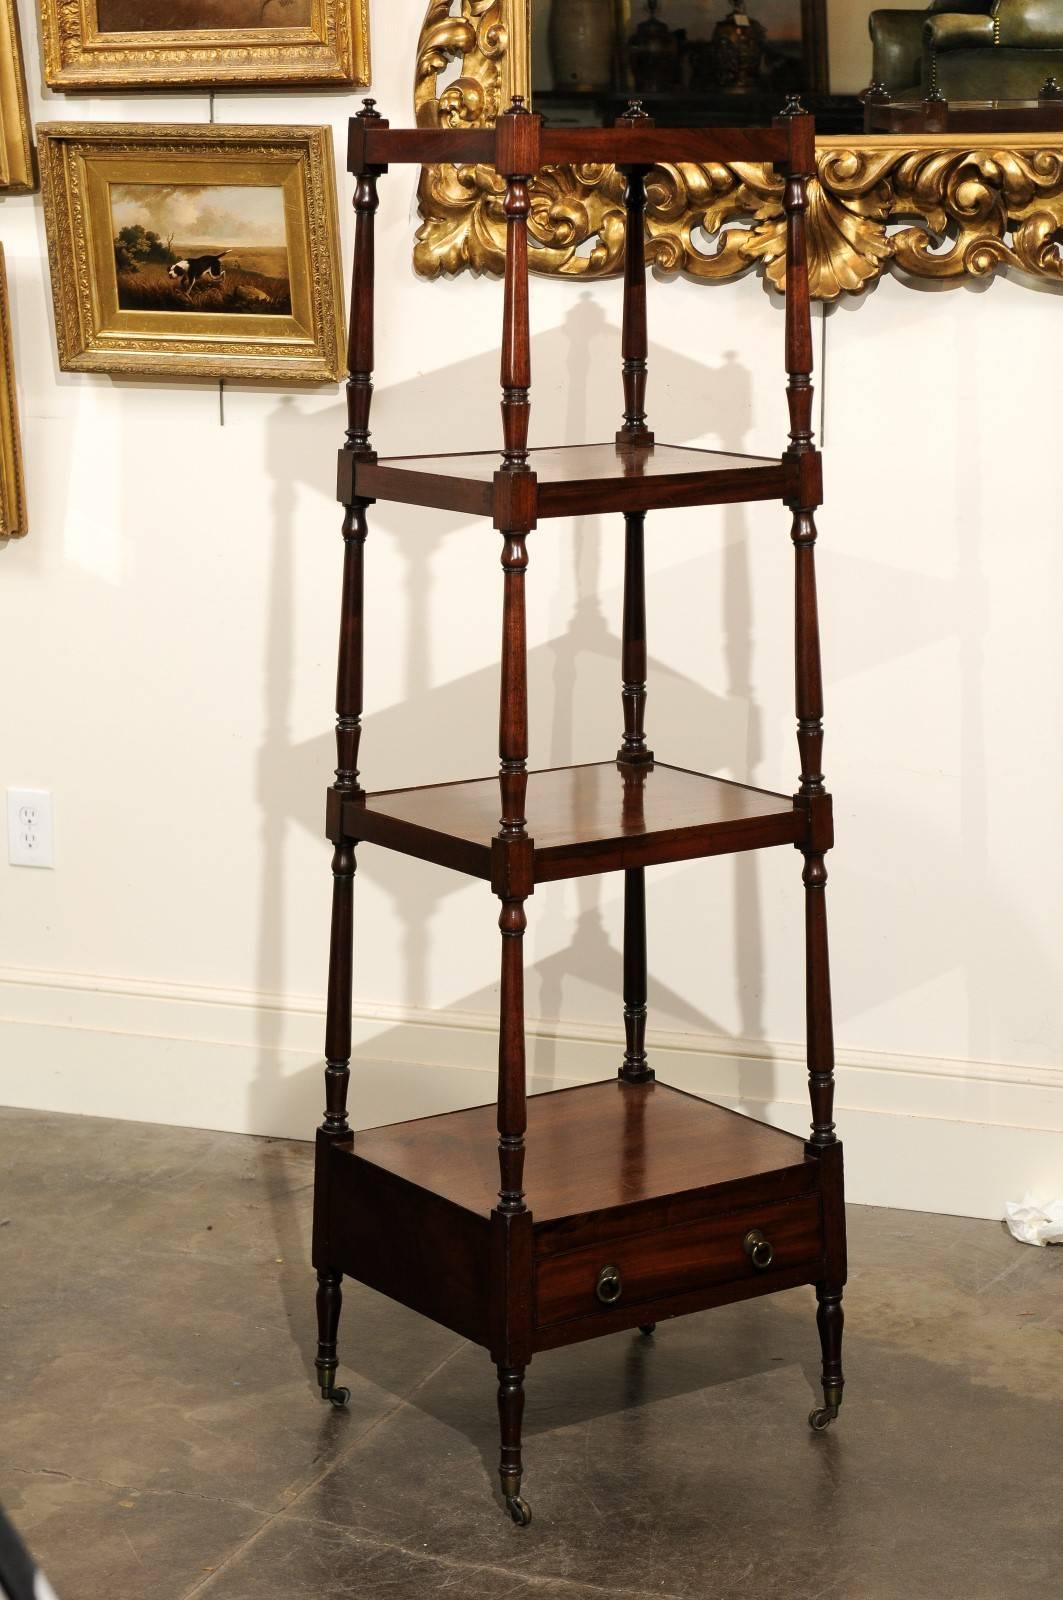 This English mid-19th century mahogany trolley features four graduated shelves over a single drawer. The shelves are secured by four turned supports on the sides, topped with discreet finials. The single drawer placed in the lower section opens with